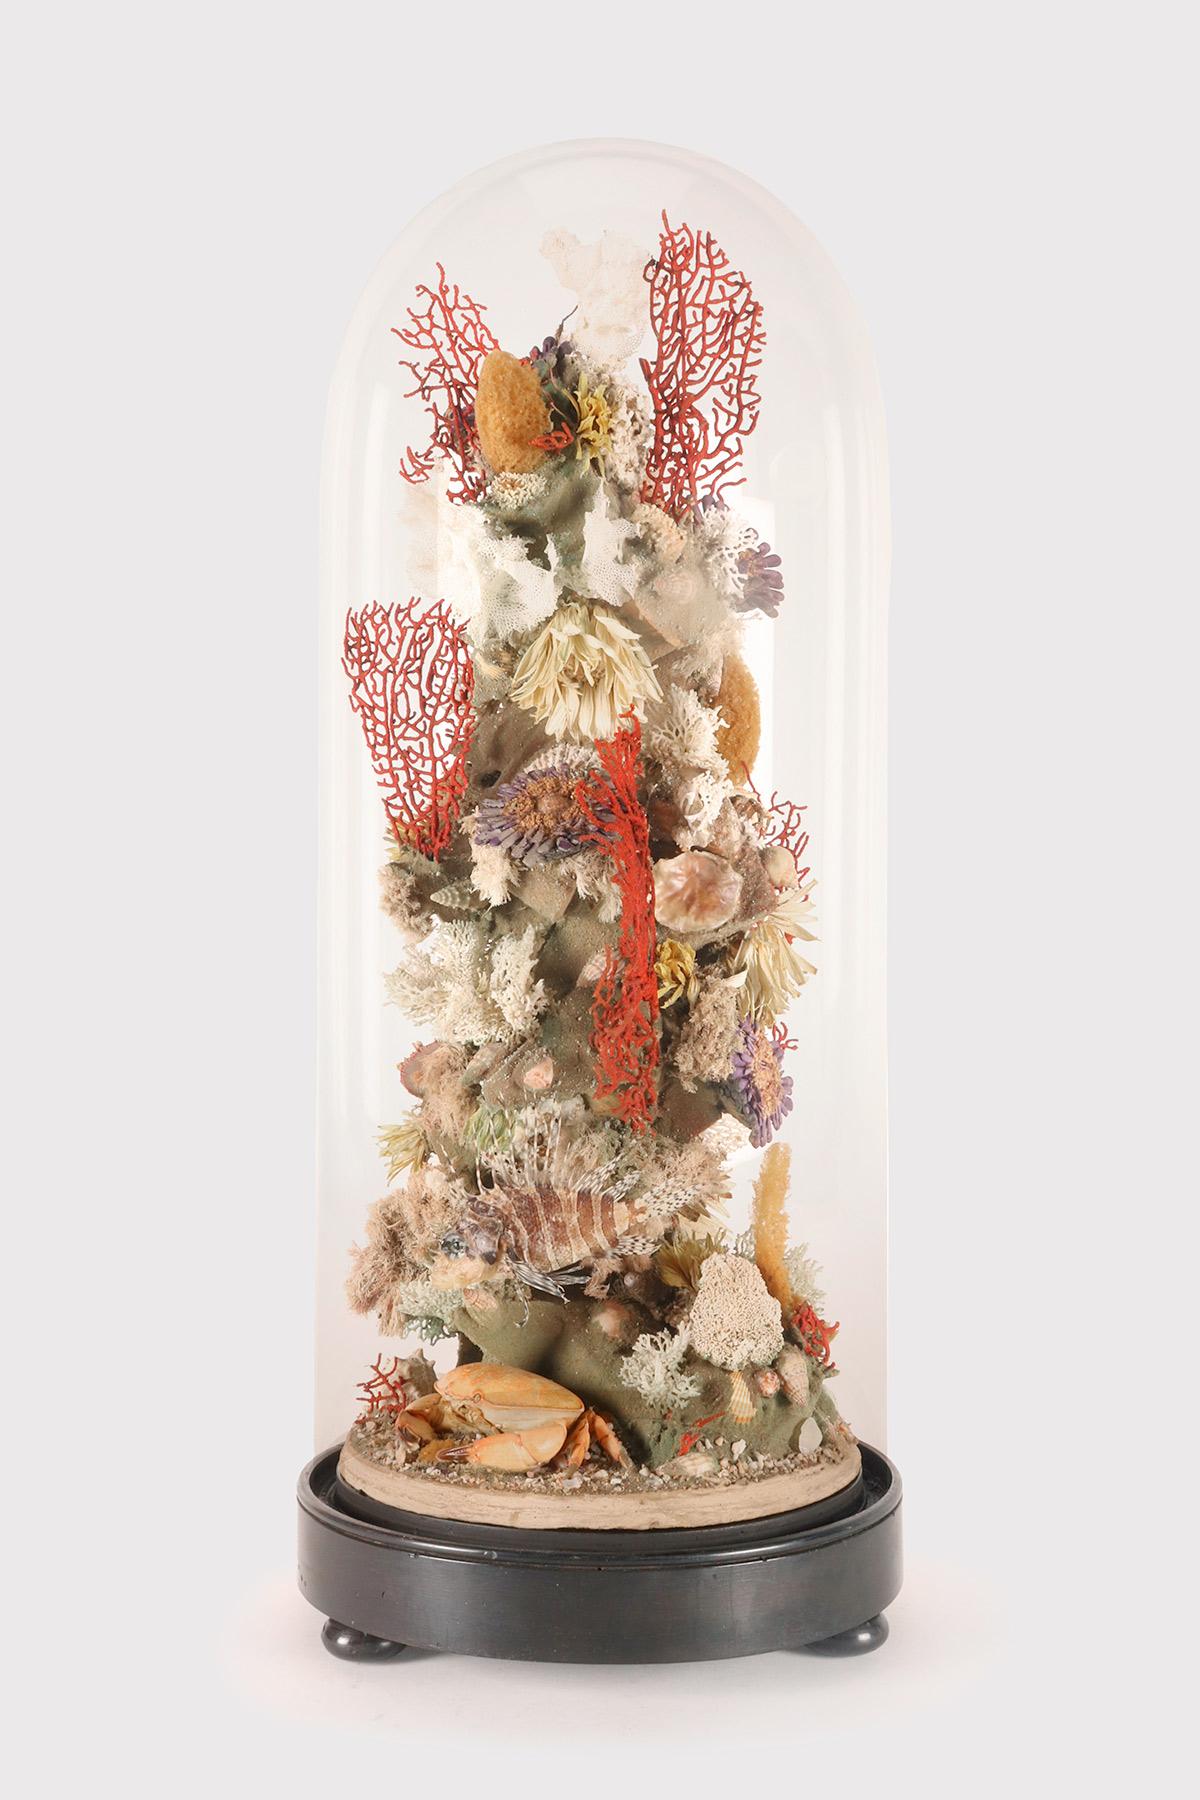 A natural Wunderkammer specimen: a marine diorama with two decoy fishes (Pterois volitans), a brunch, fan shaped, of Horny coral, starfish, and reef. The Specimens are mounted inside a glass dome, over a wooden base. Italy circa1870. 